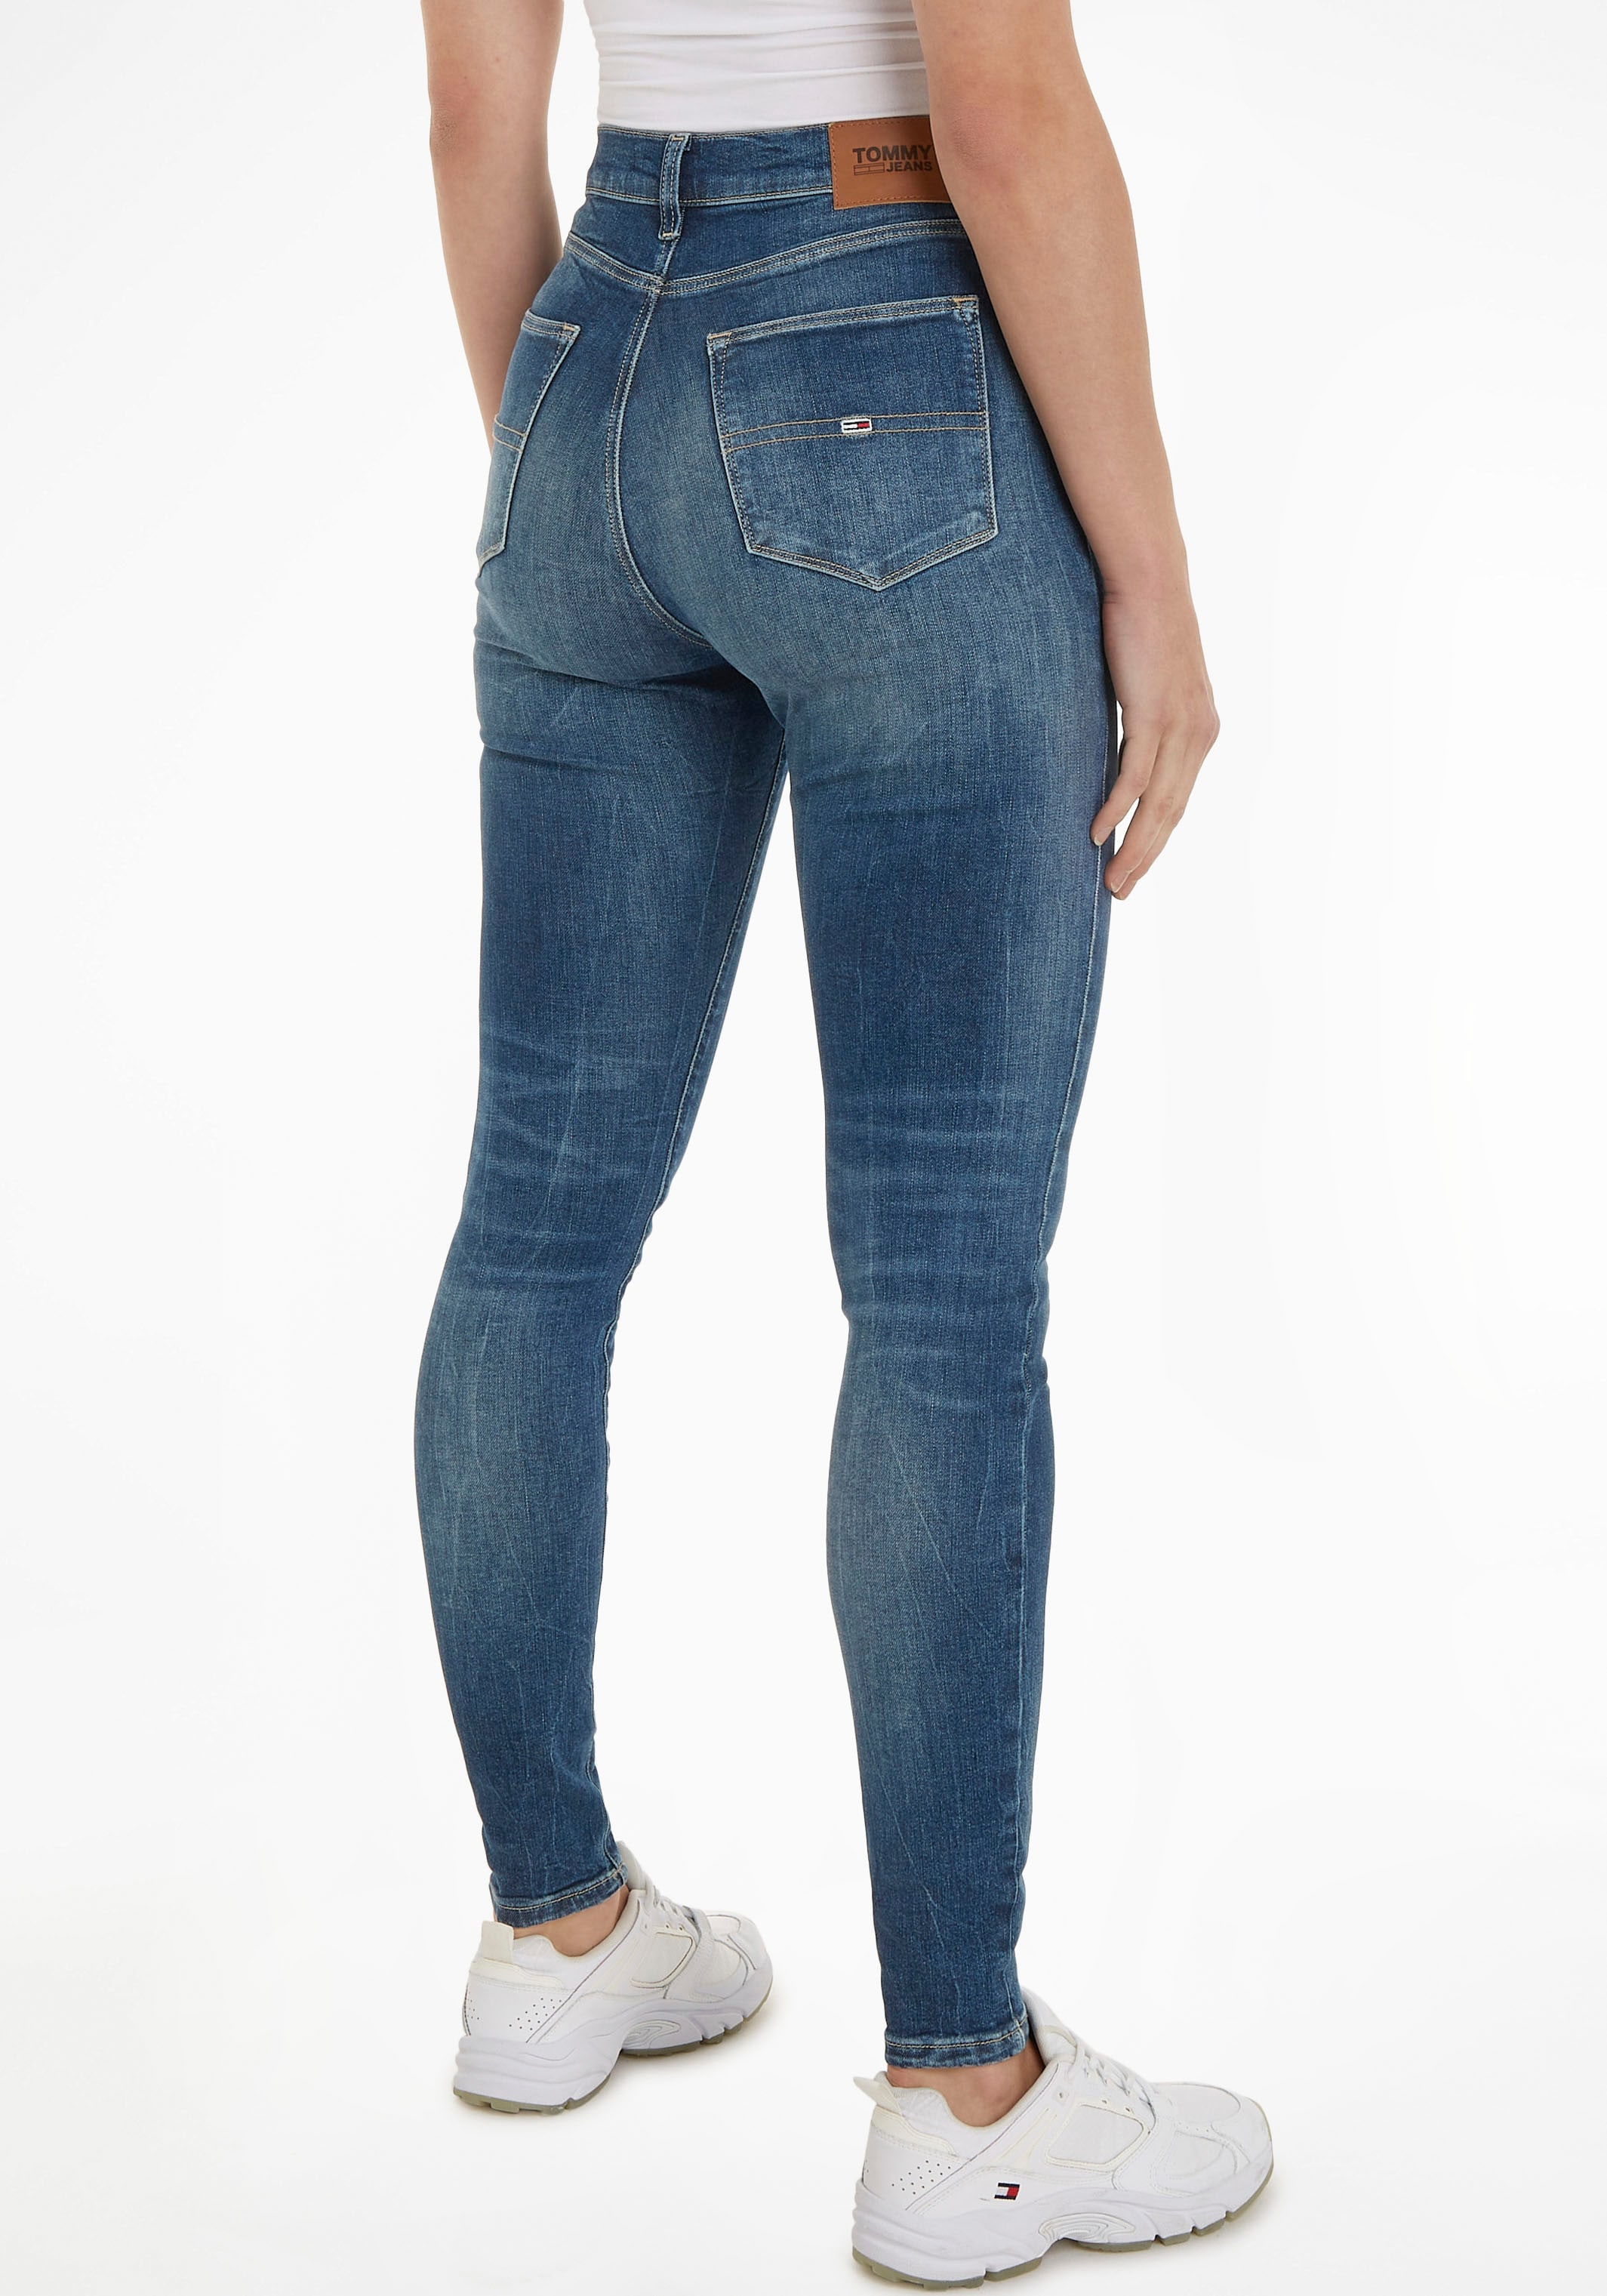 SSKN im »Jeans Jeans Online und Labelflags Shop Logobadge Tommy Skinny-fit-Jeans mit SYLVIA CG4«, HR OTTO